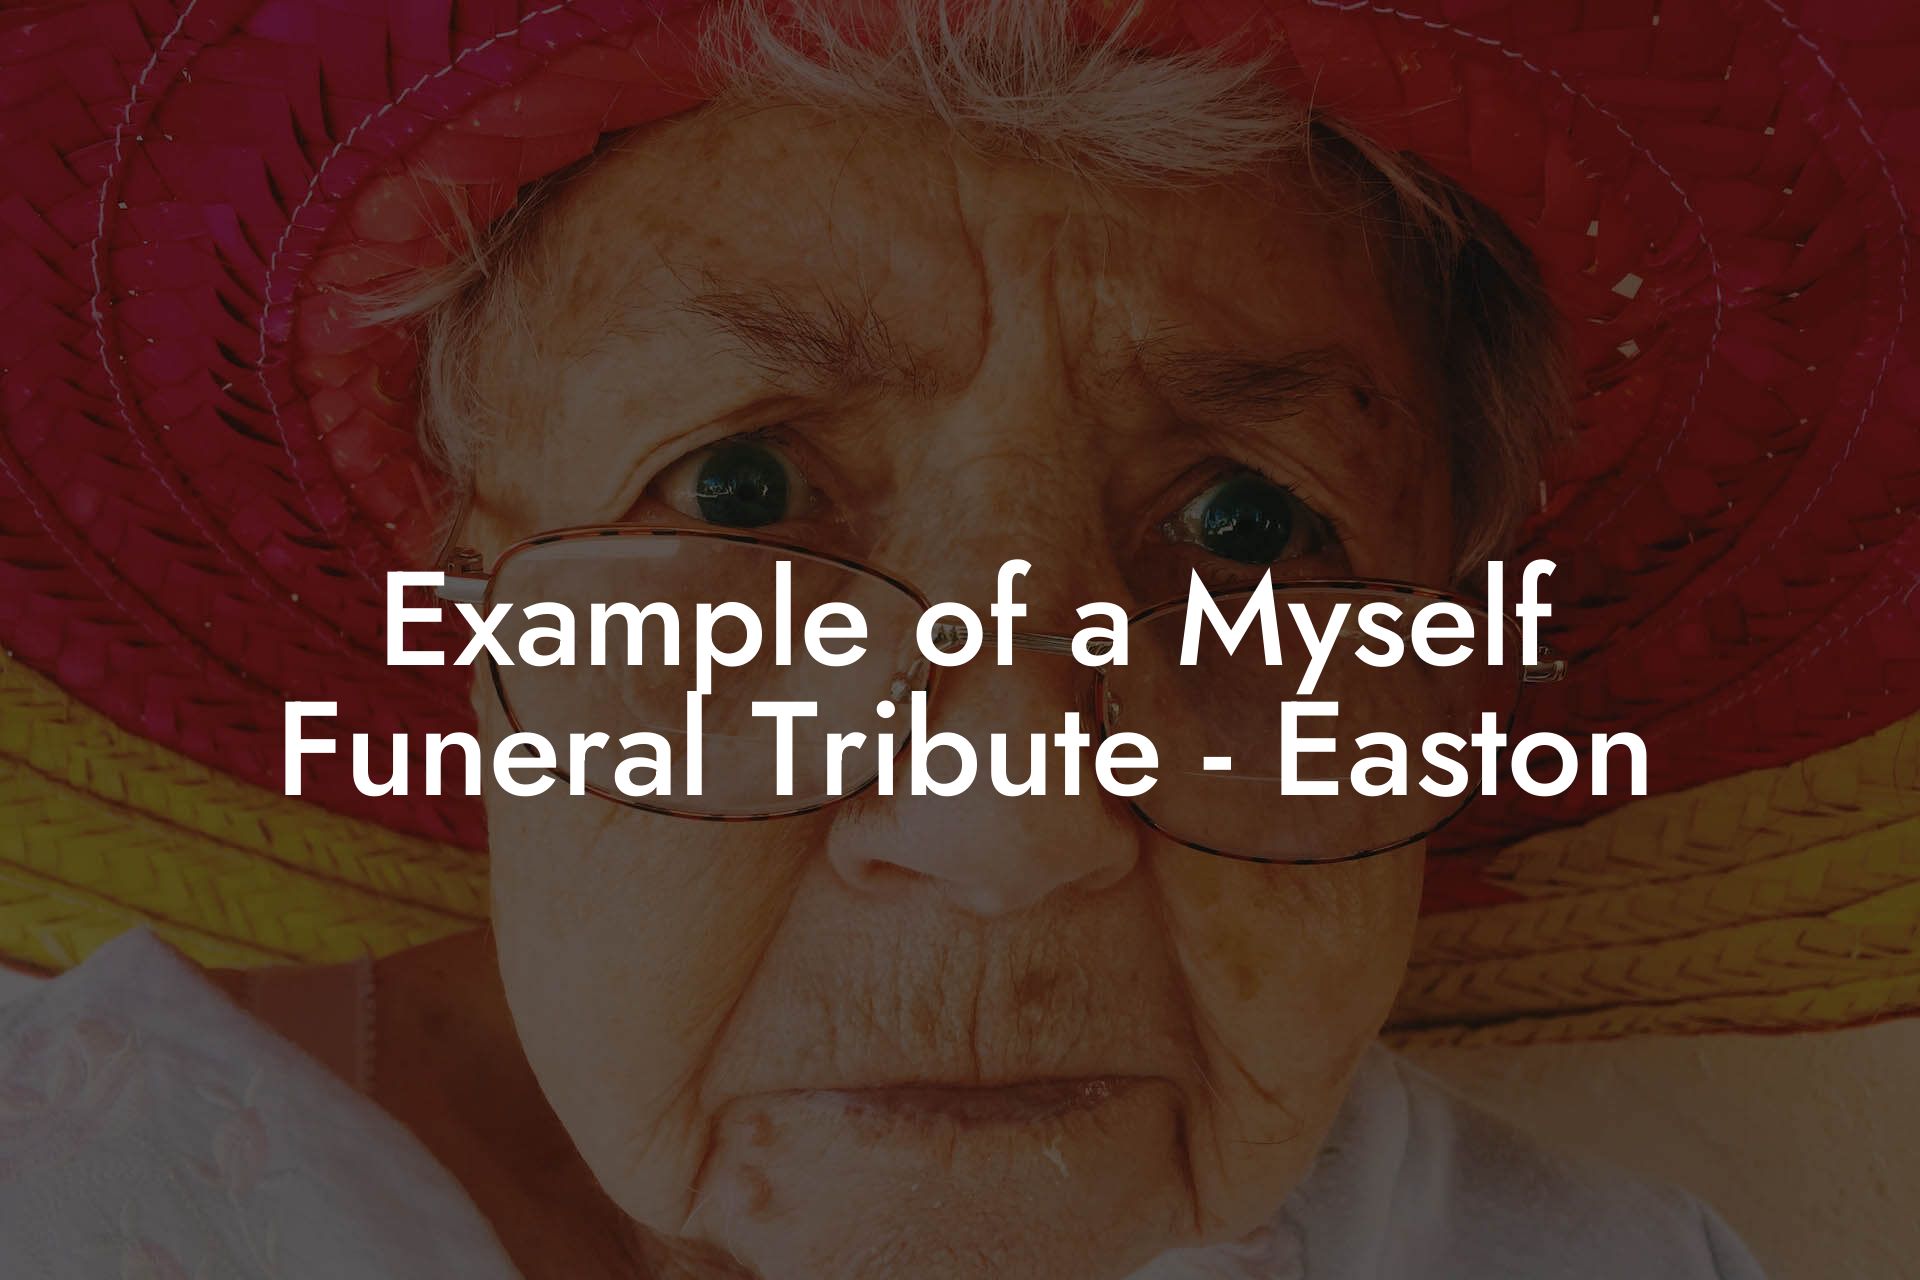 Example of a Myself Funeral Tribute - Easton